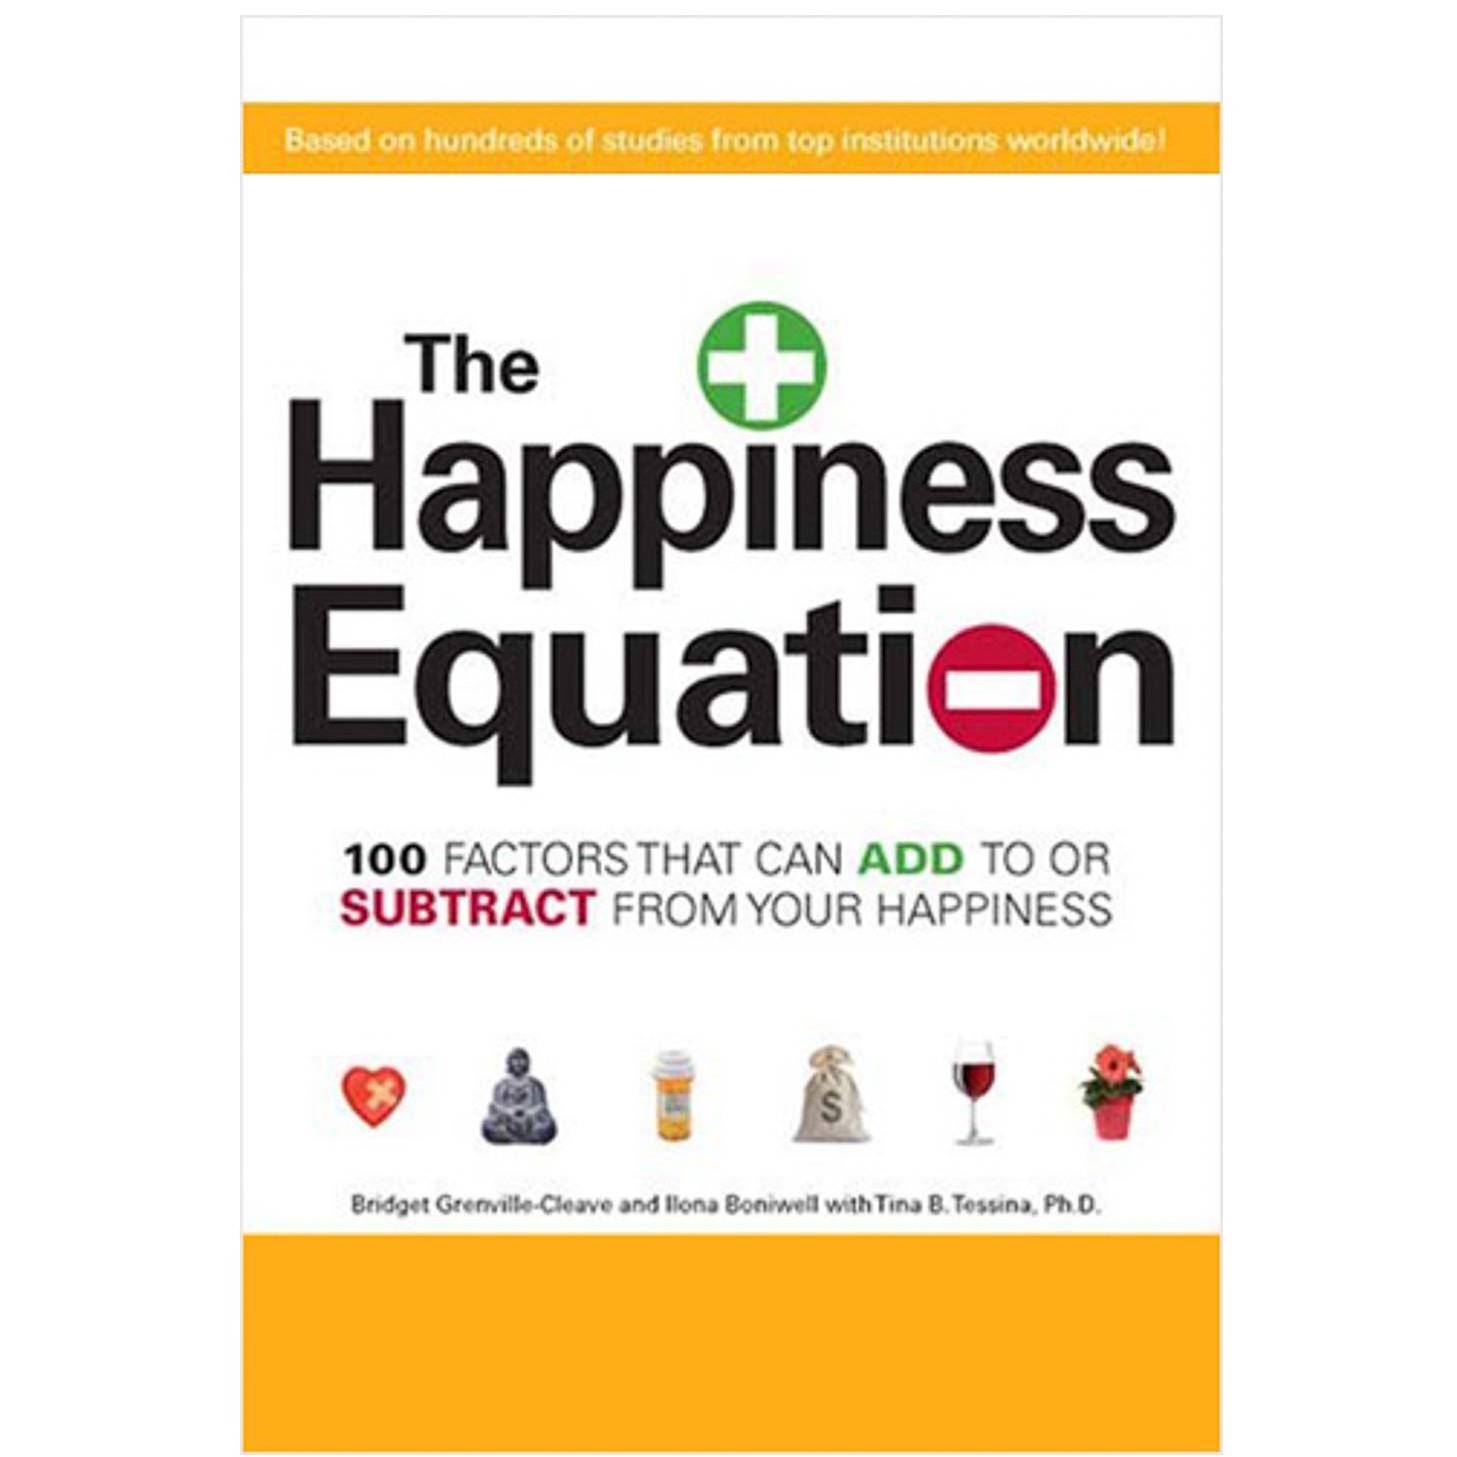 Book - The happiness equation